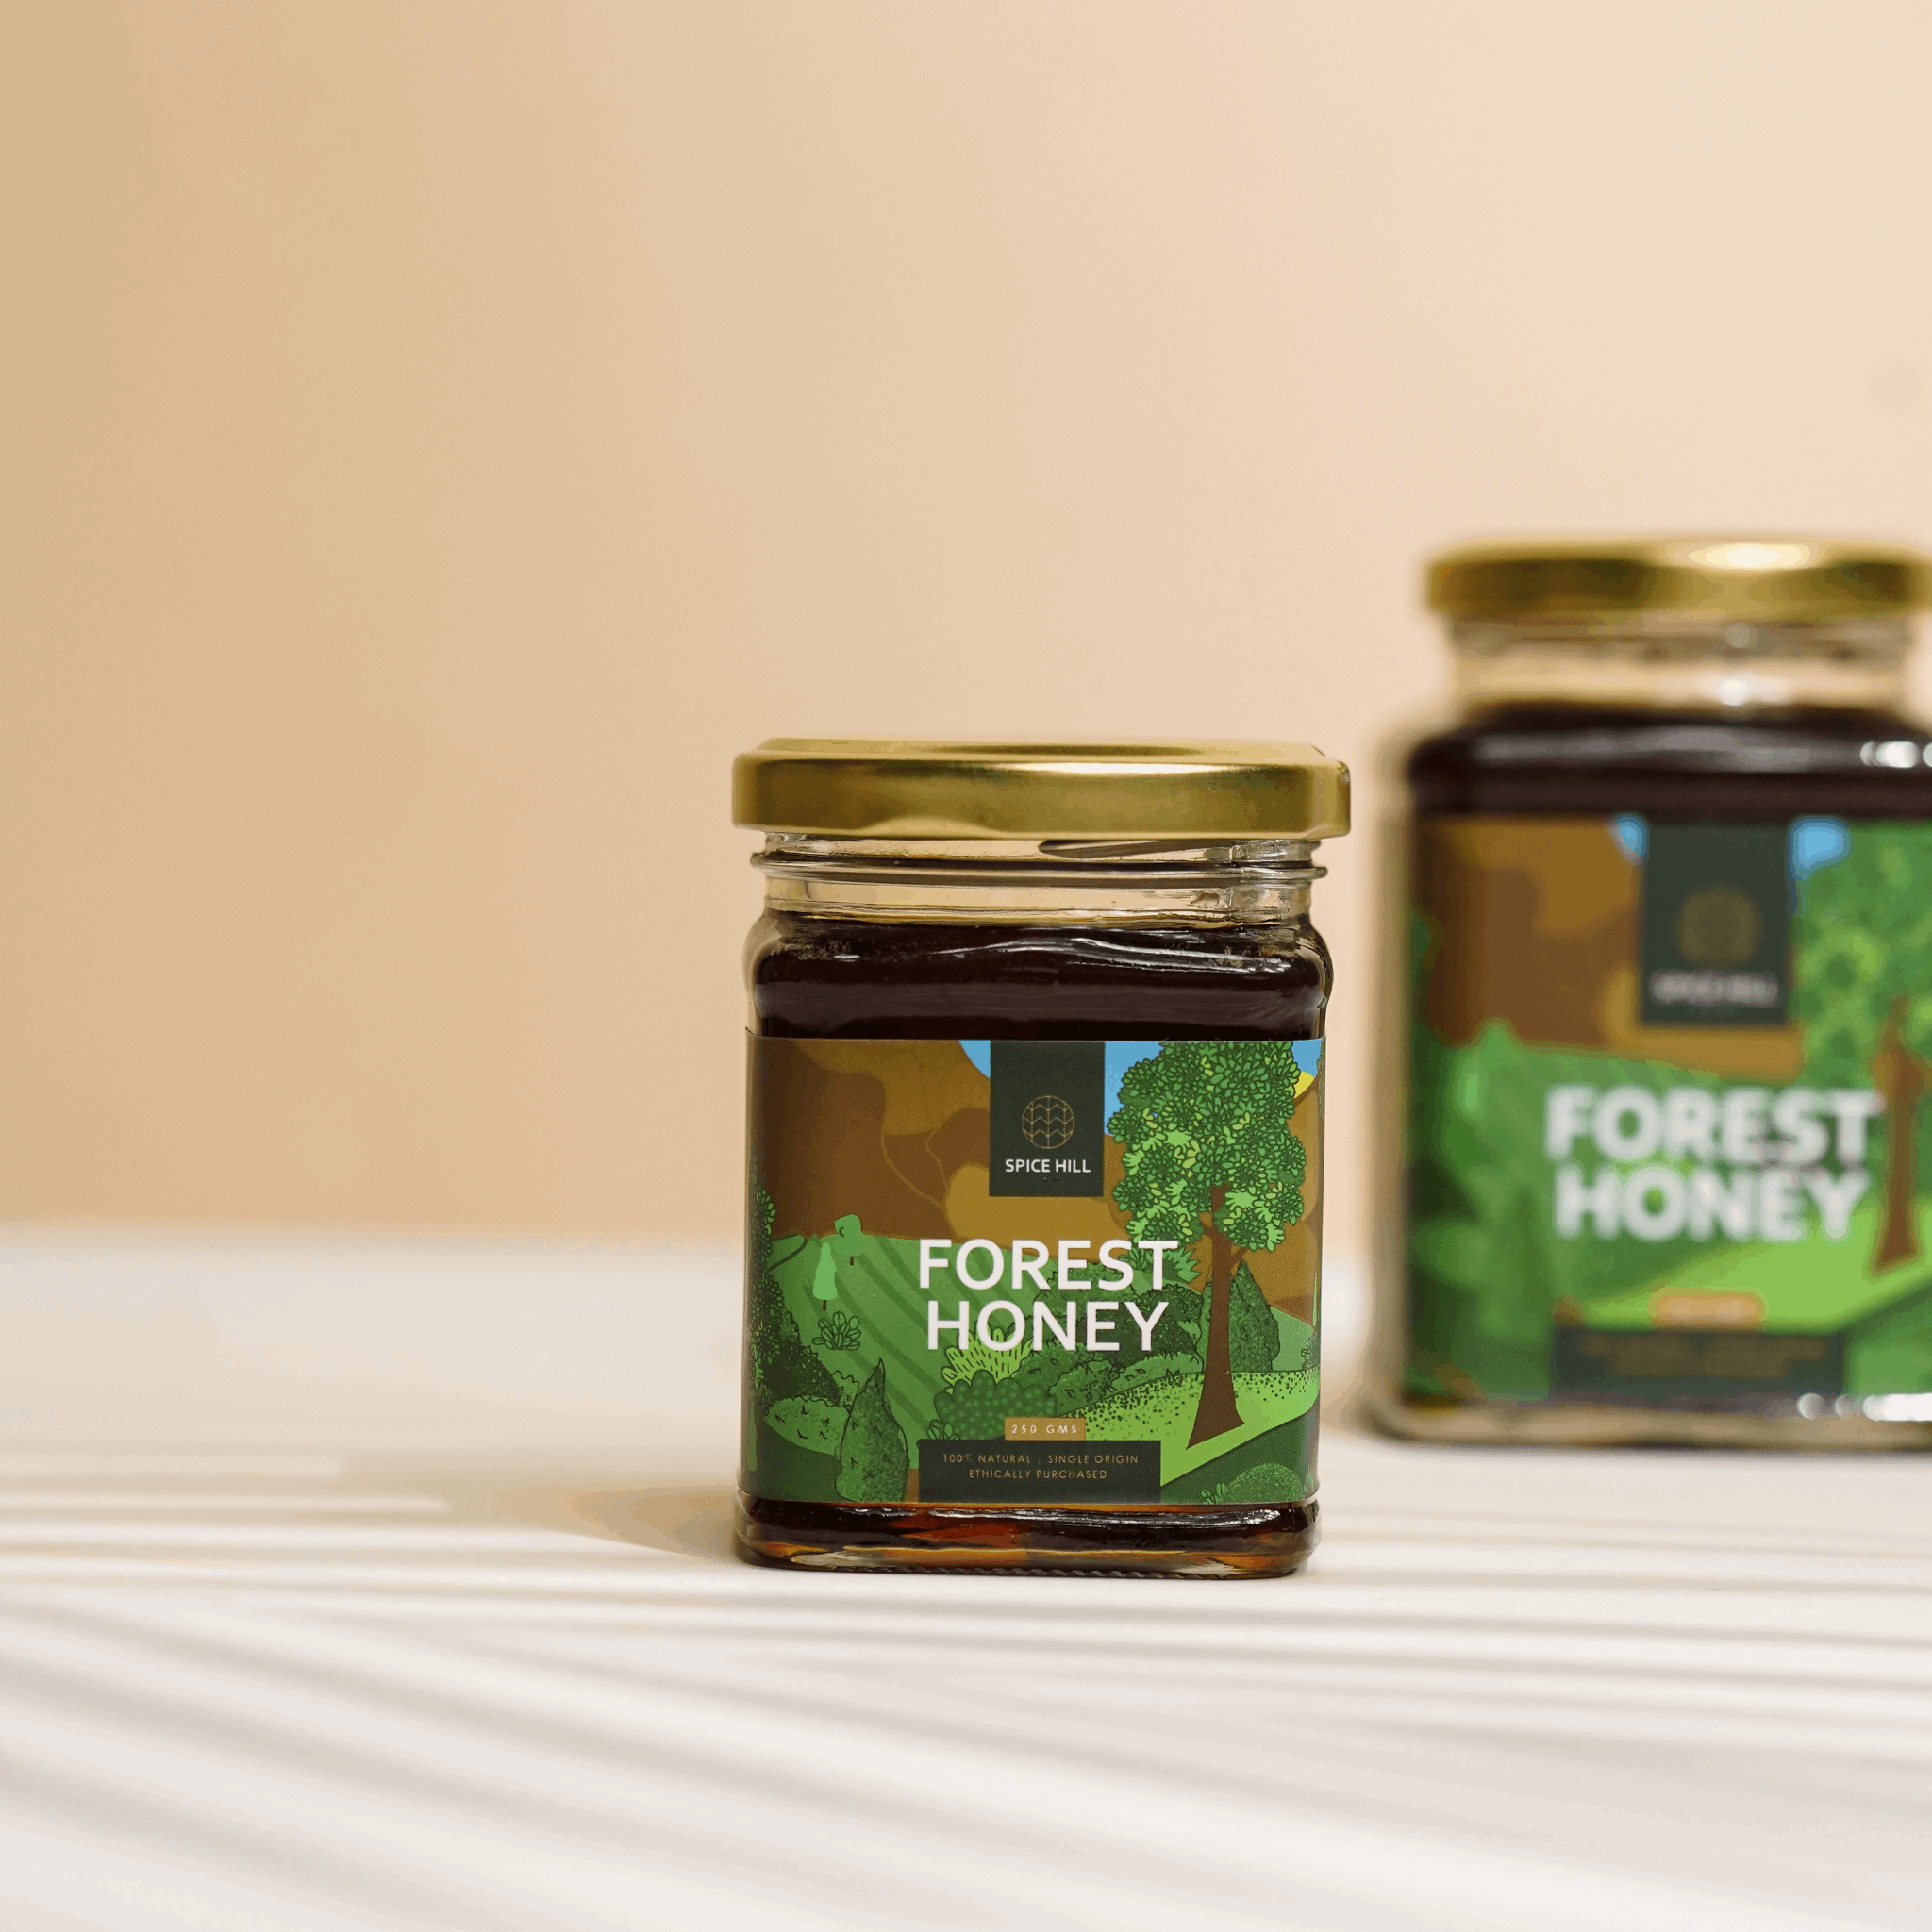 Forest Honey – Spice Hill Farms